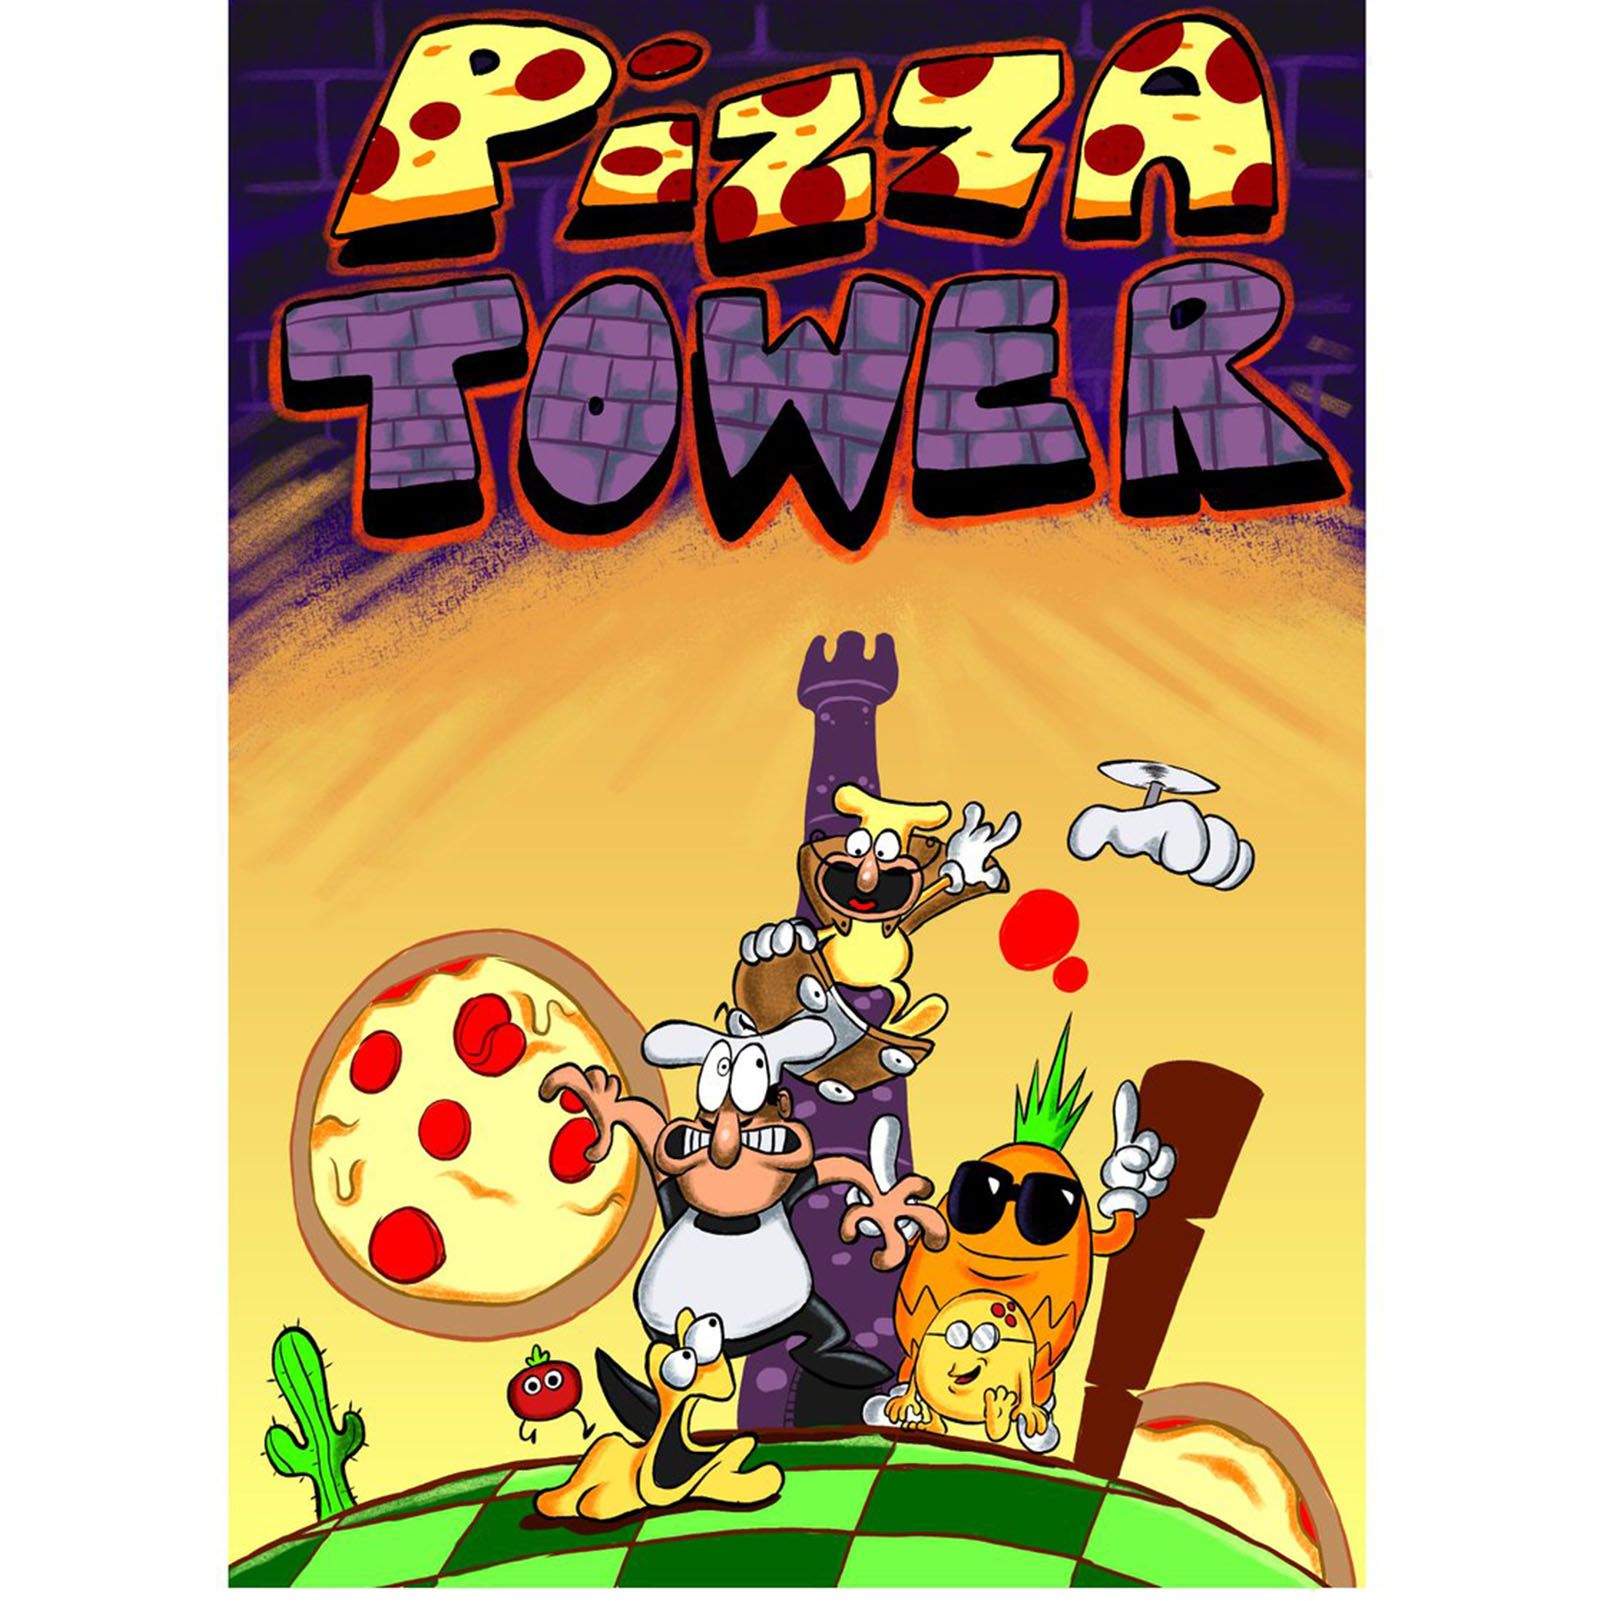 Pizza tower steam фото 28